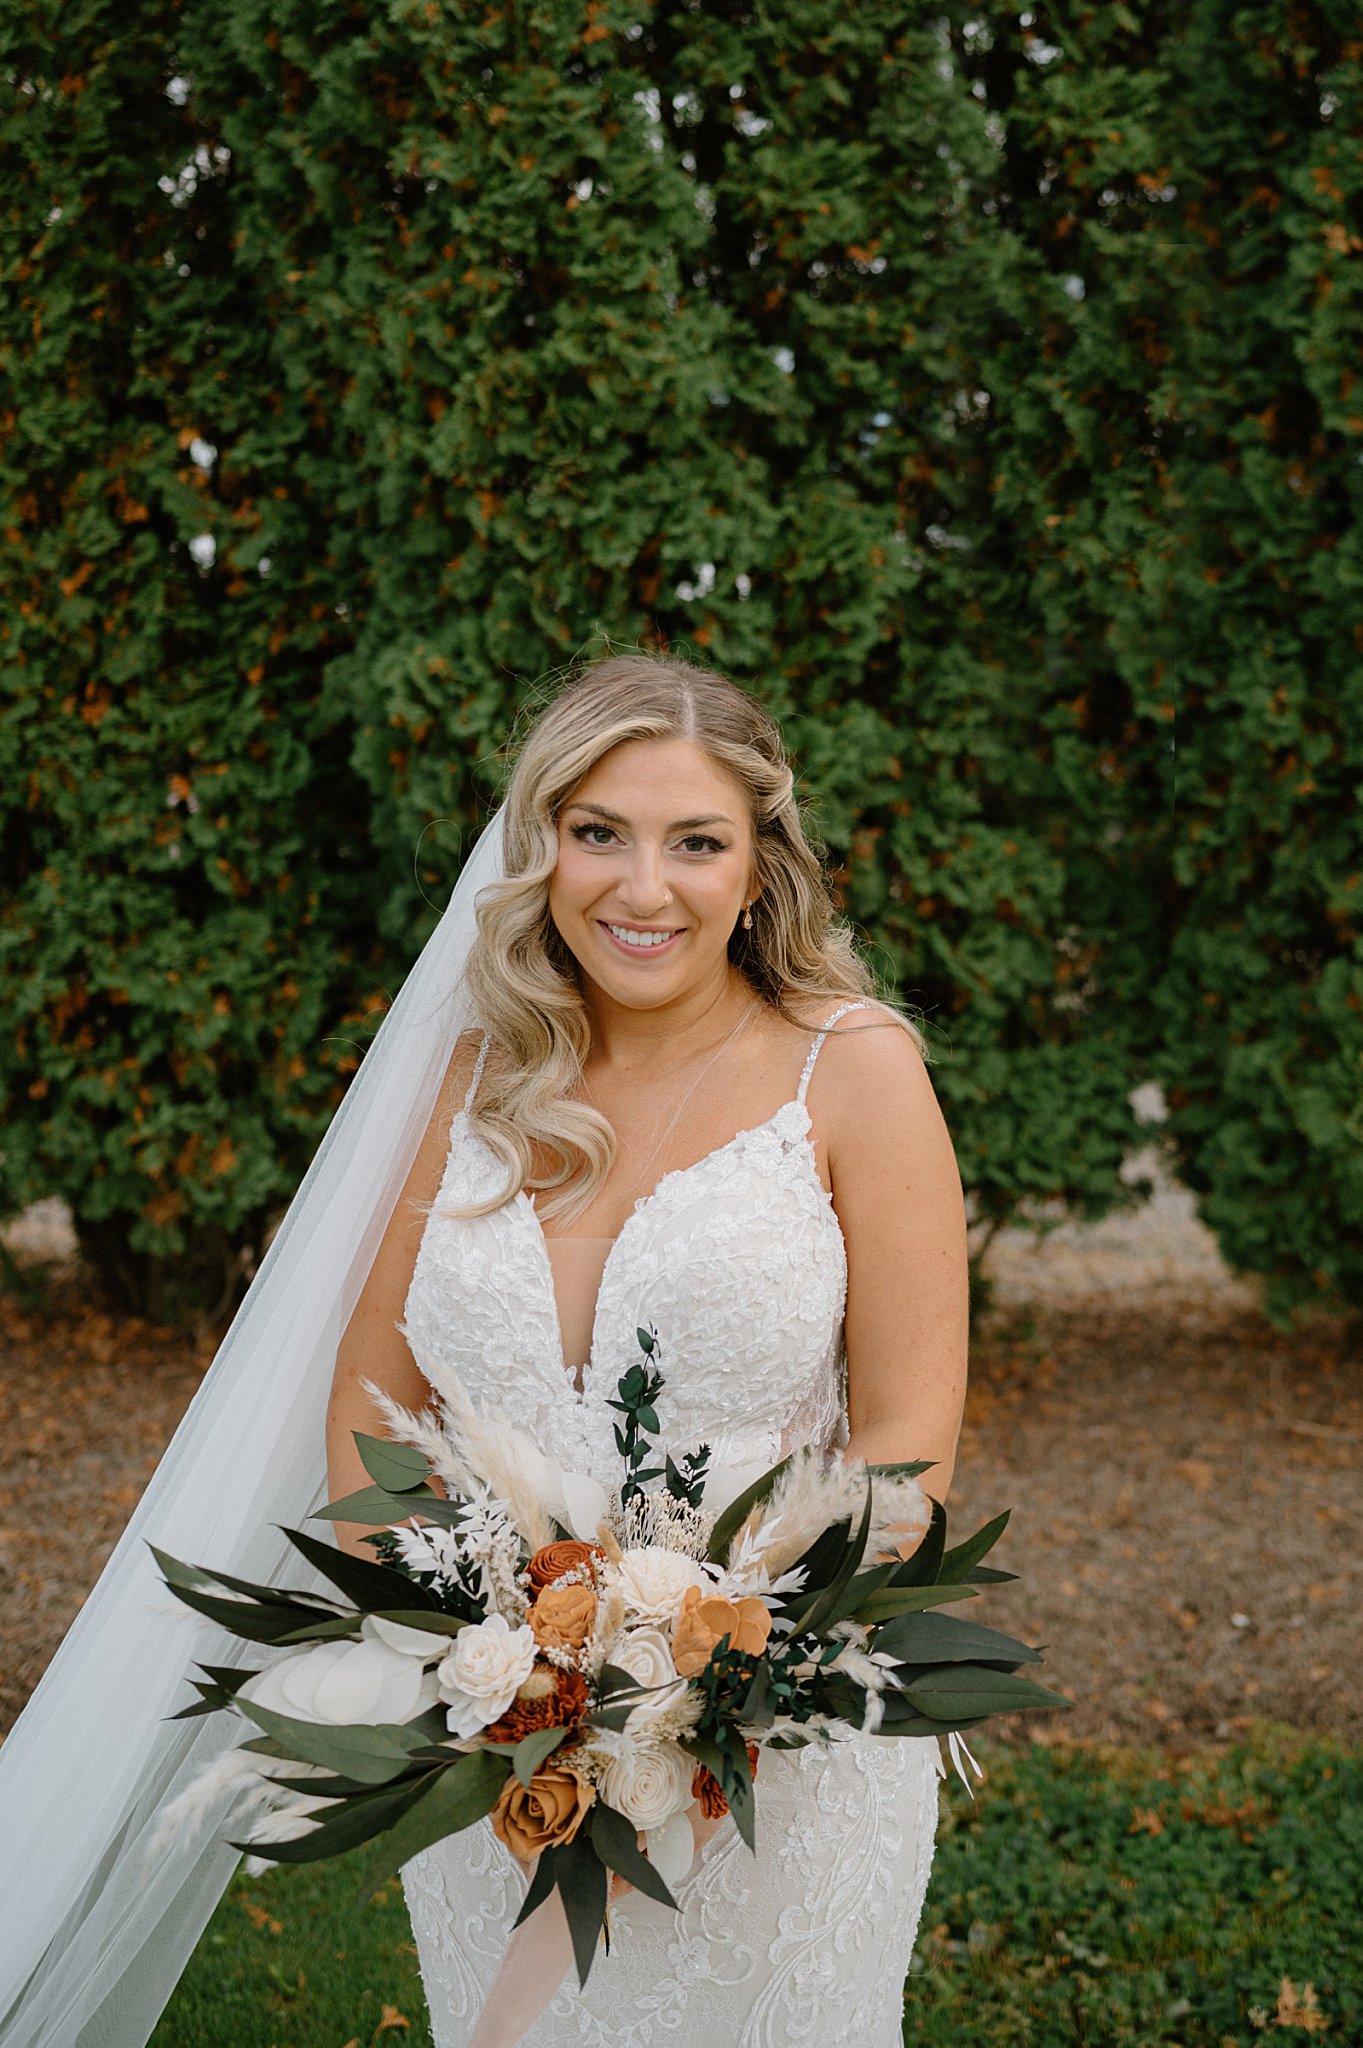 bride holds wedding florals as her veil blows in the wind by Midwest wedding photographer